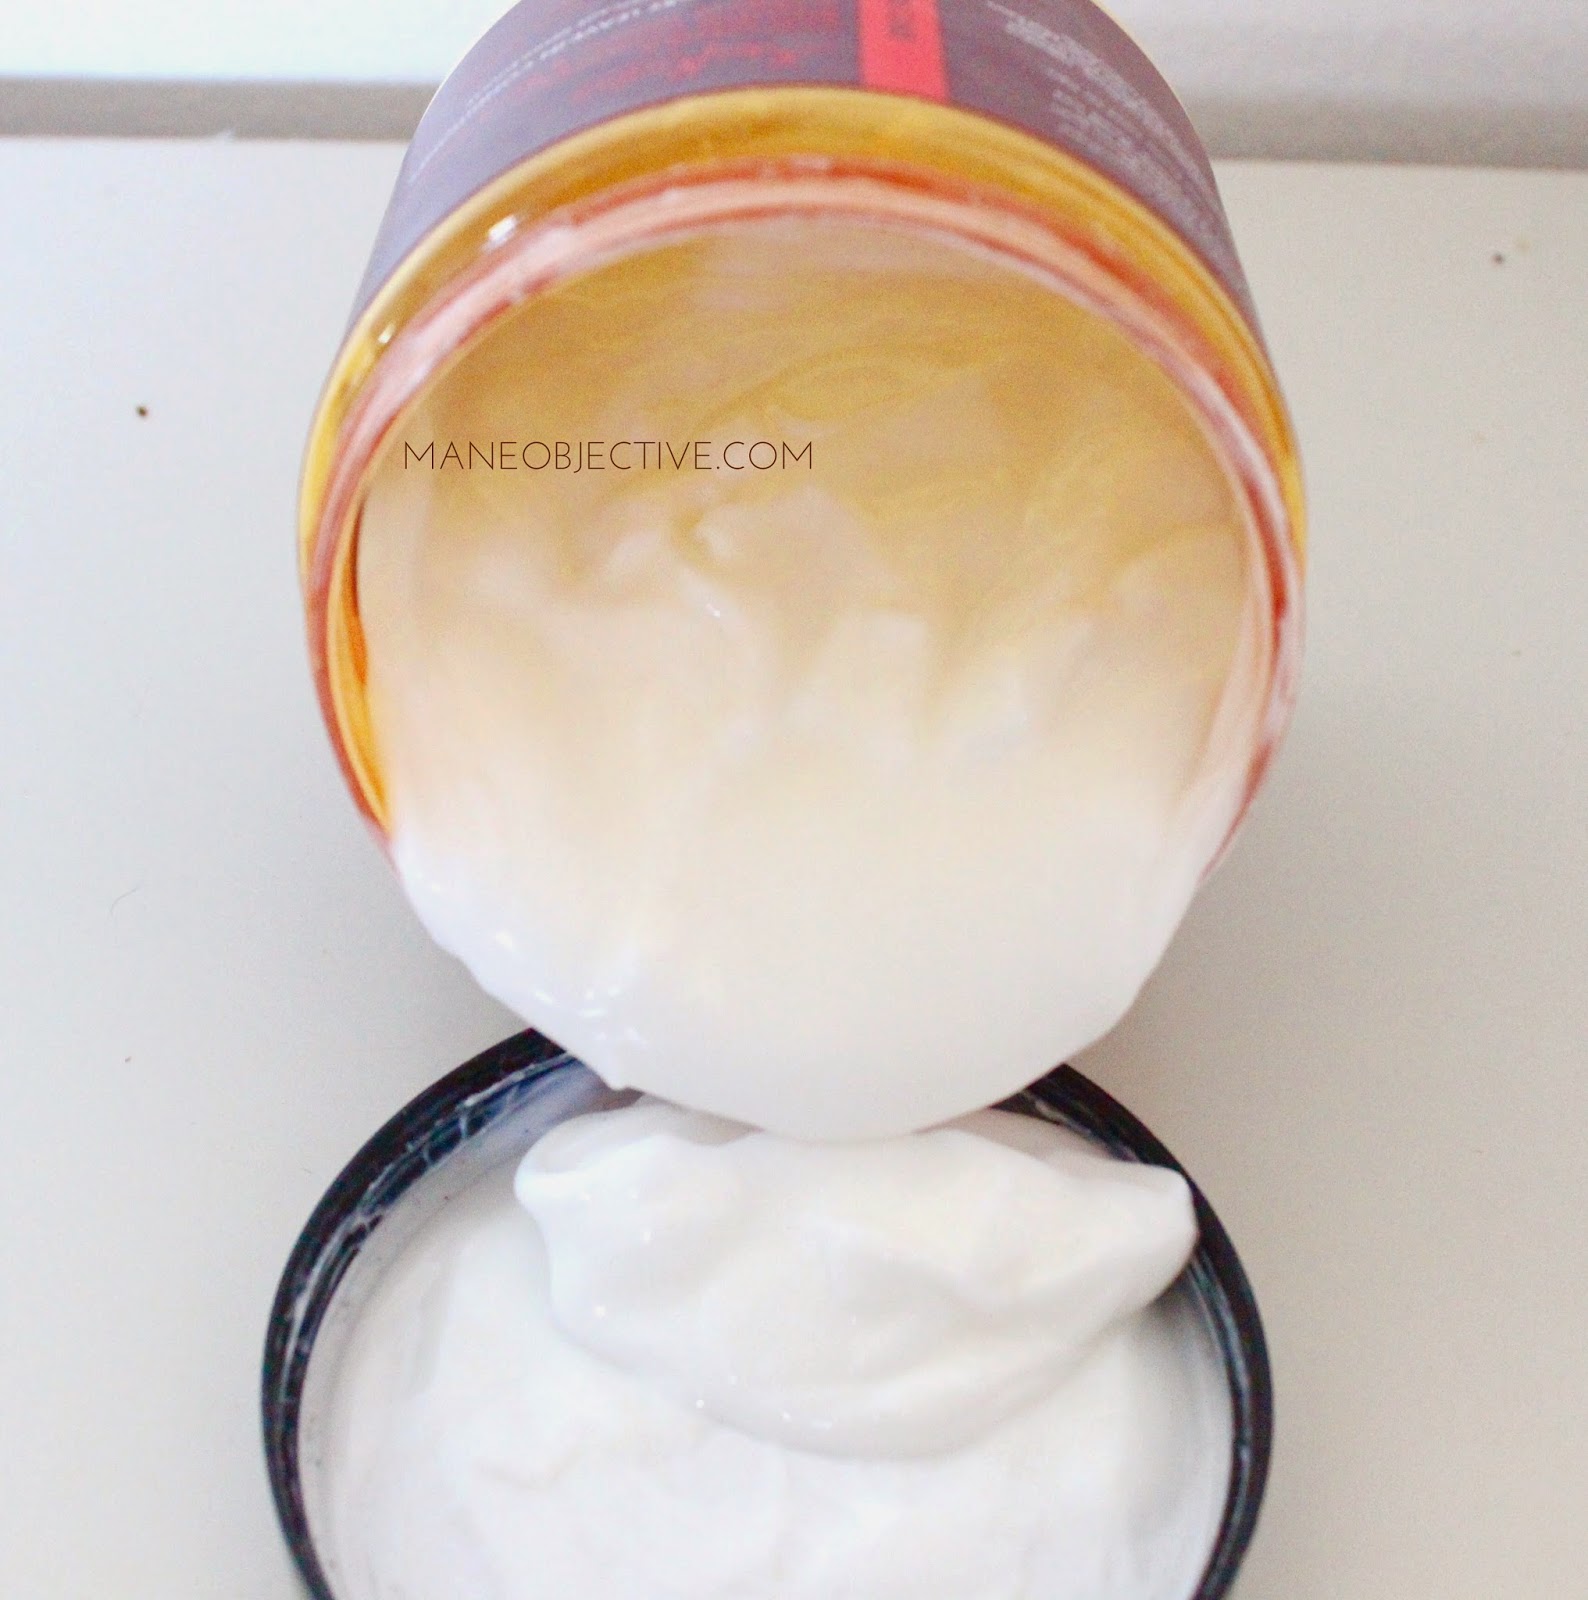 Shea Moisture Professional Curl Memory Leave-In Conditioner Review